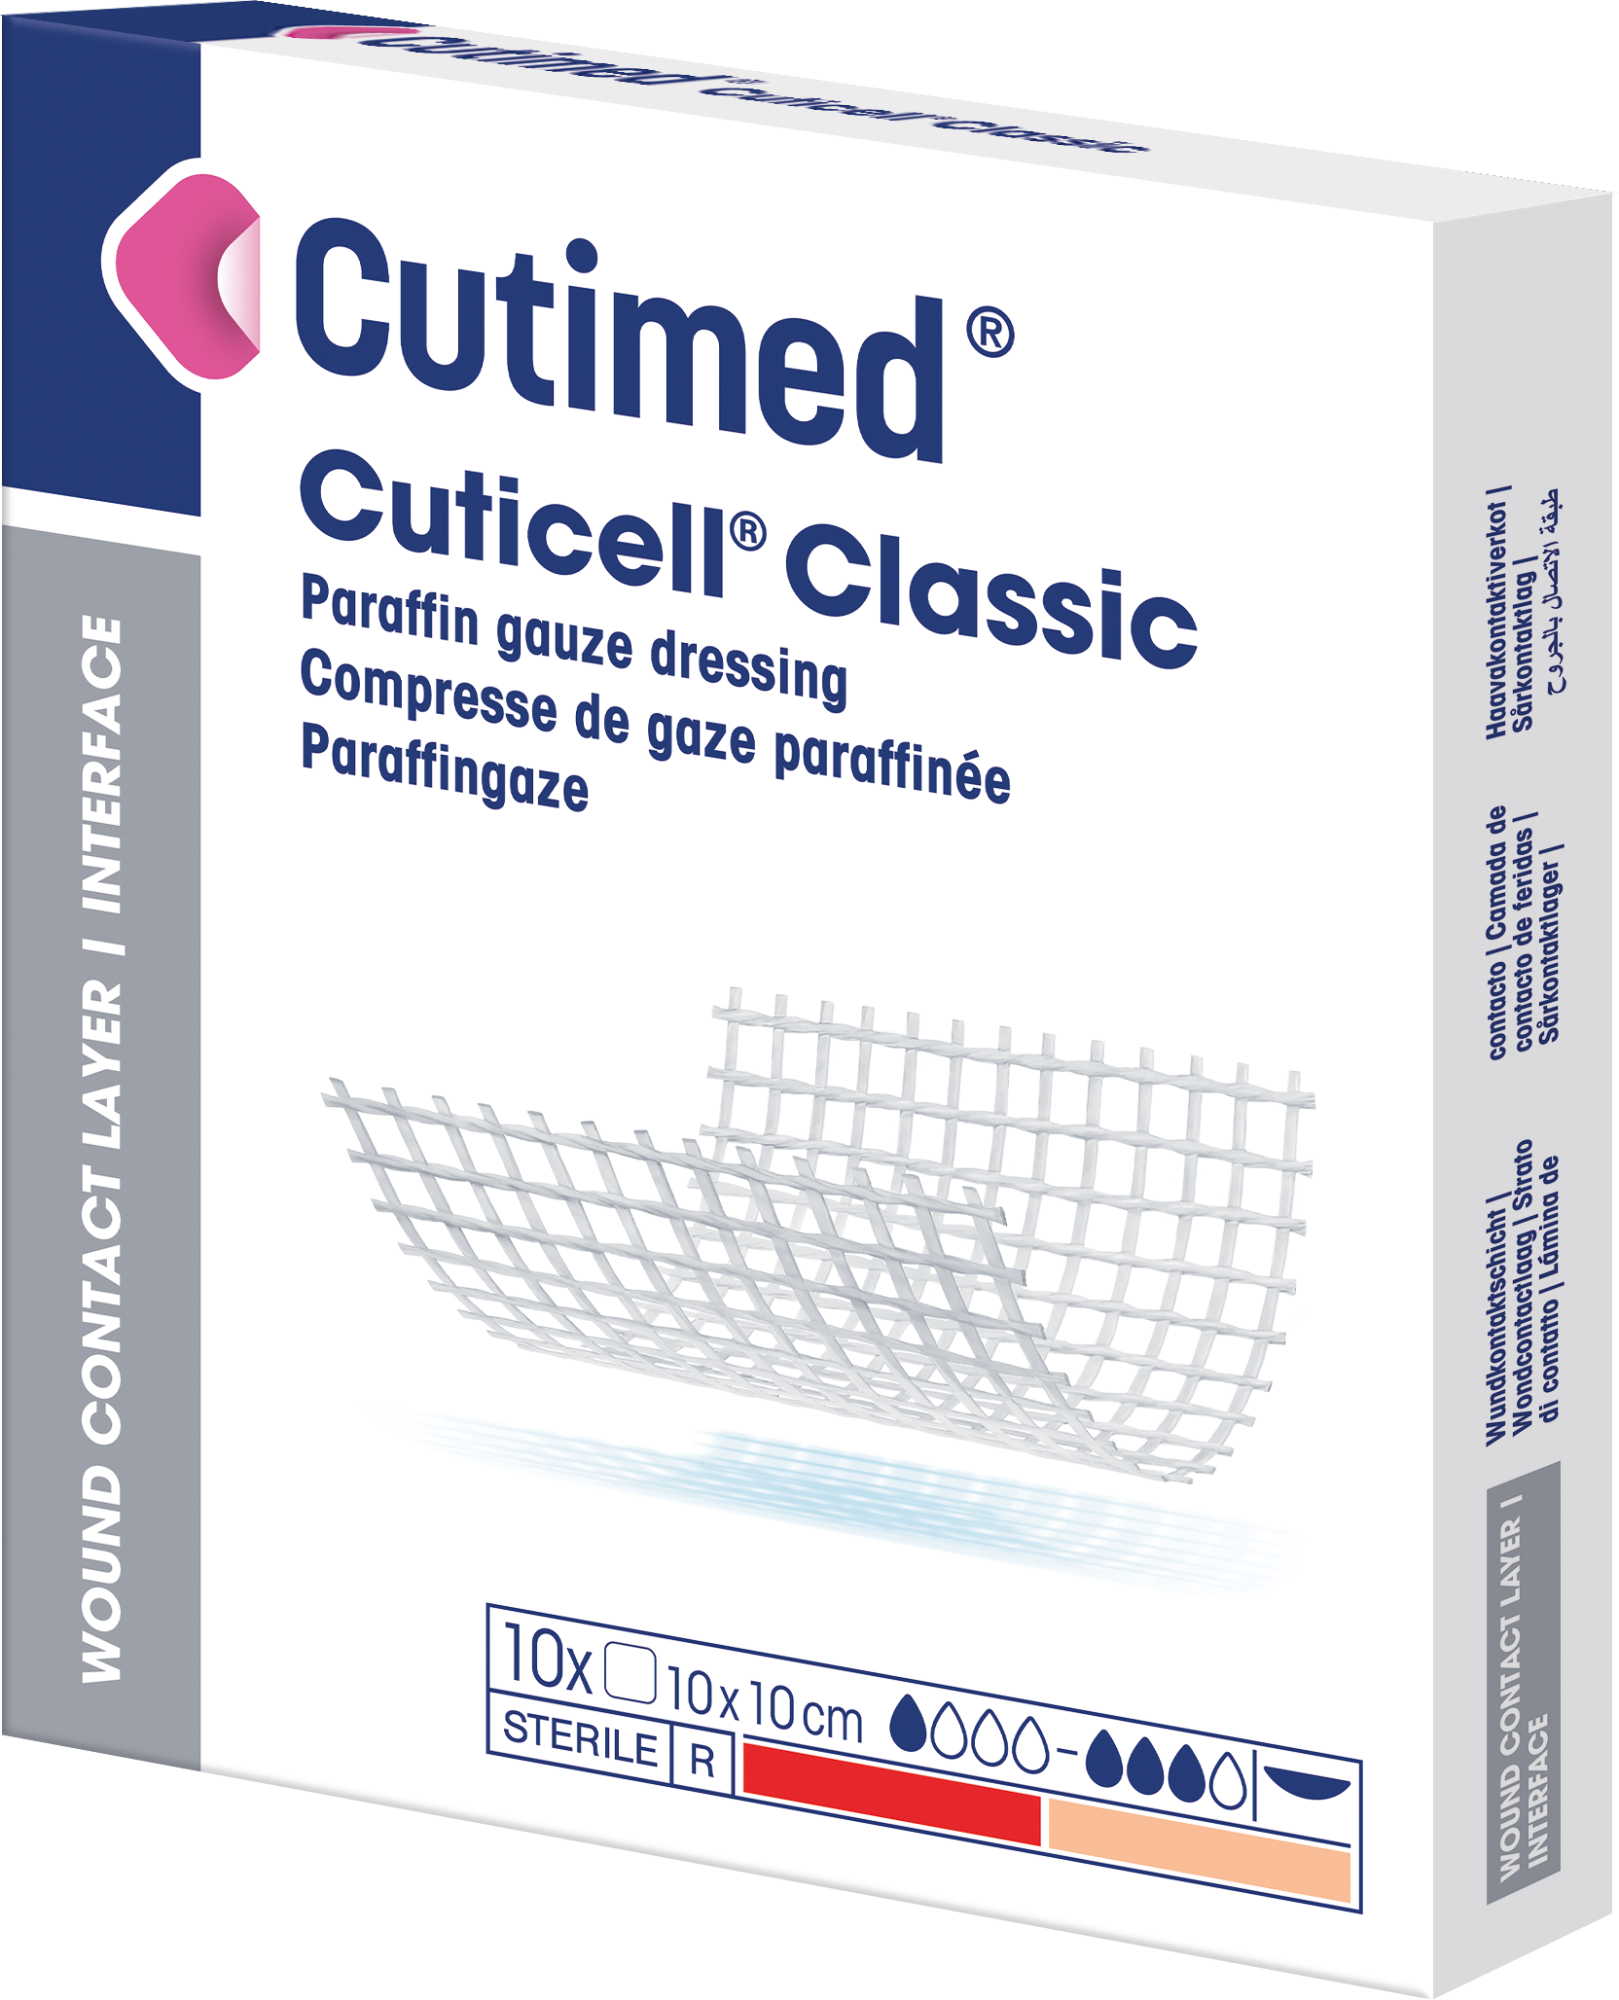 Image showing a packshot of Cutimed® Cuticell® Classic